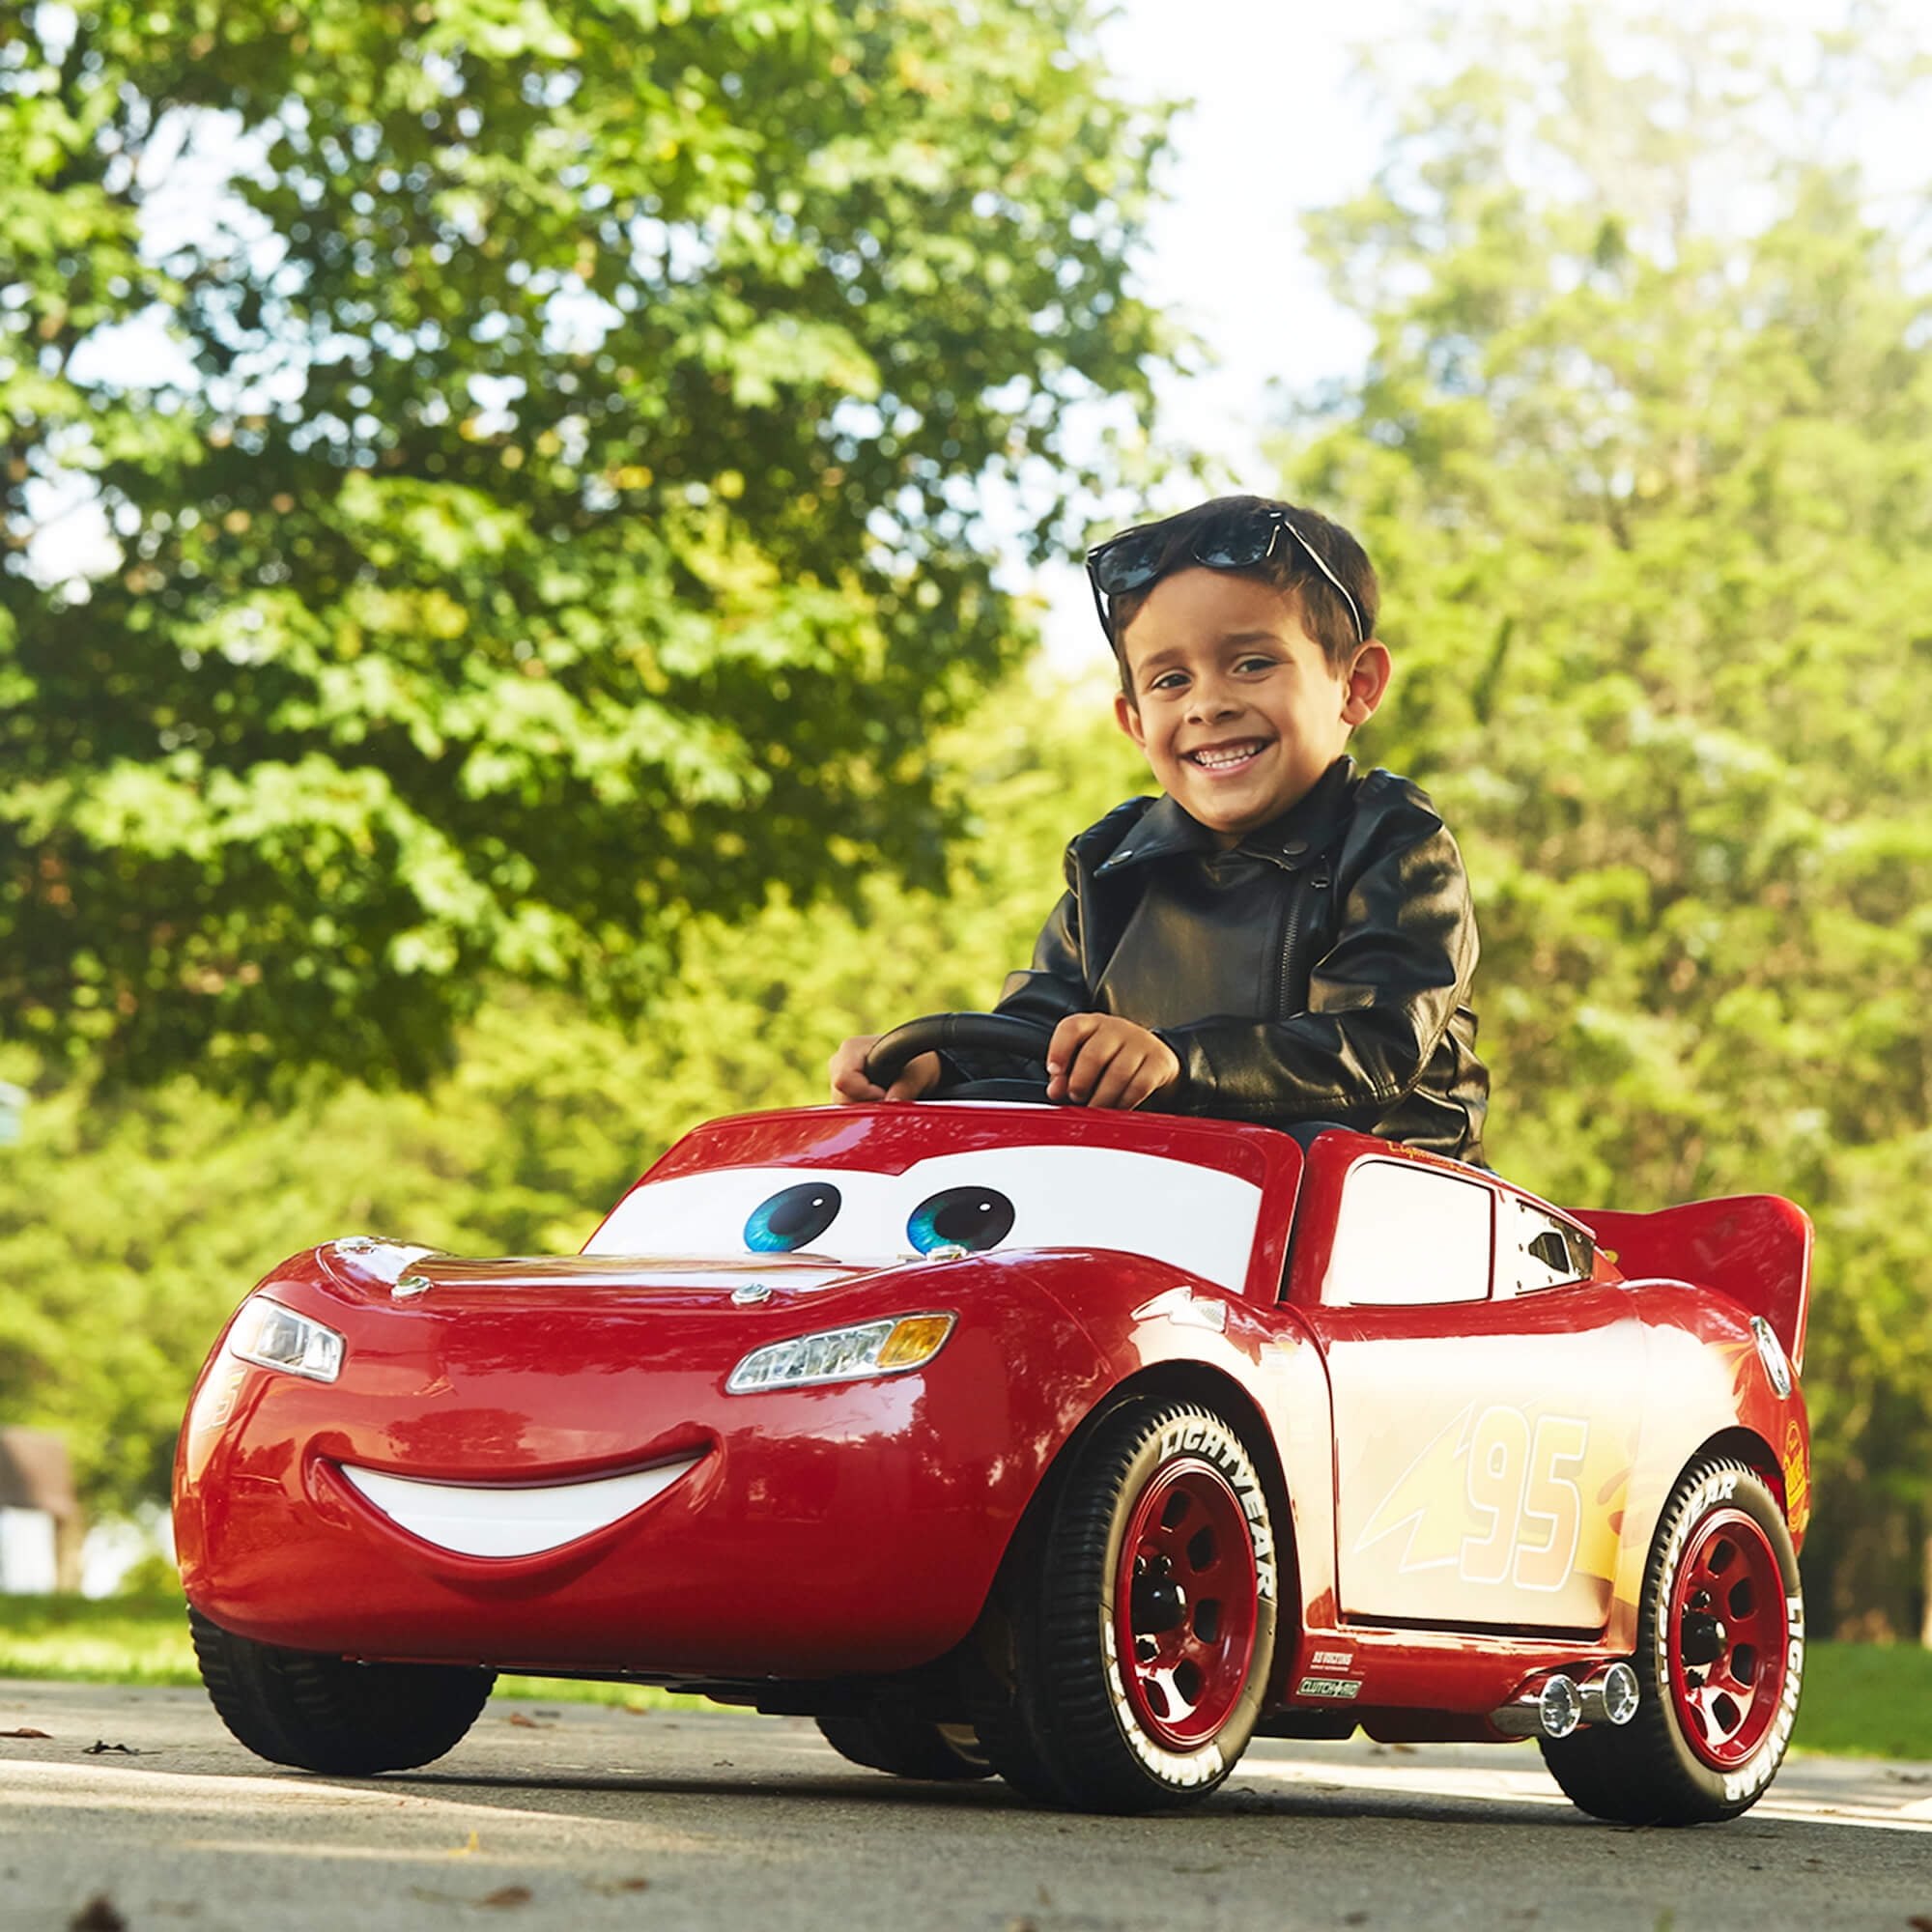 lightning mcqueen electric ride on